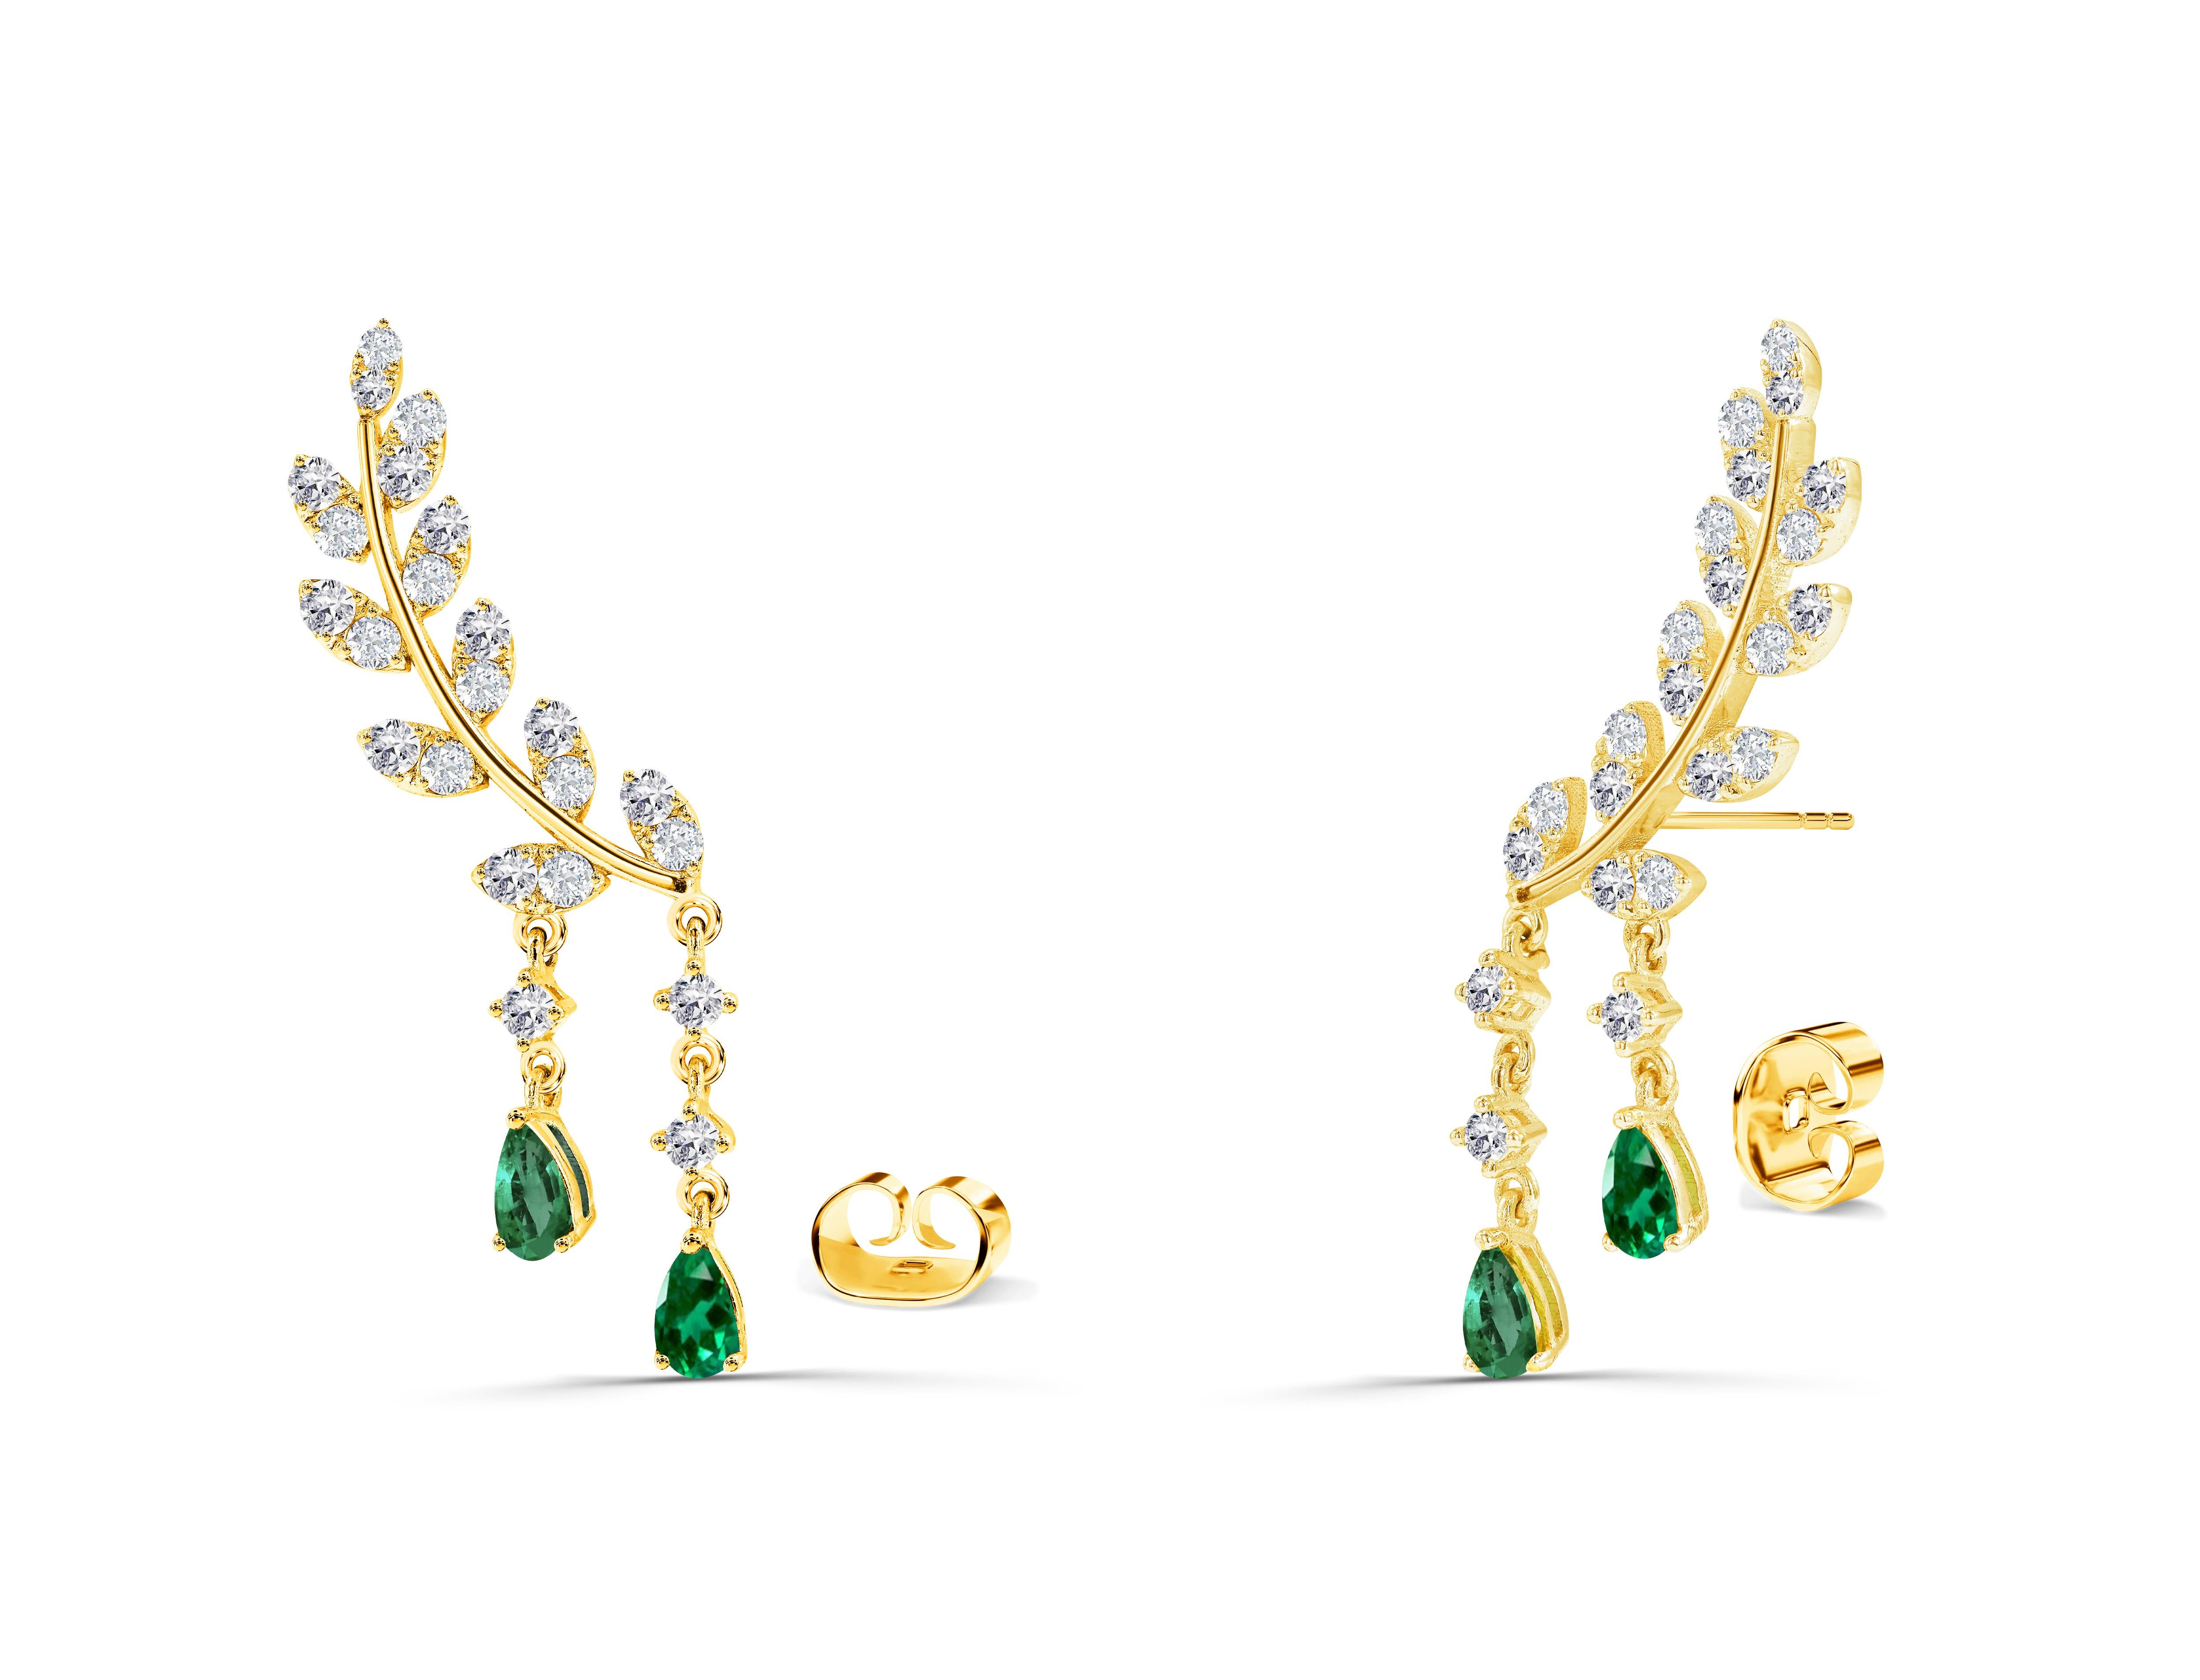 Modern 2.25ct Diamond And Emerald Leaf Drop Earrings In 14k Gold Round Cut Diamond For Sale